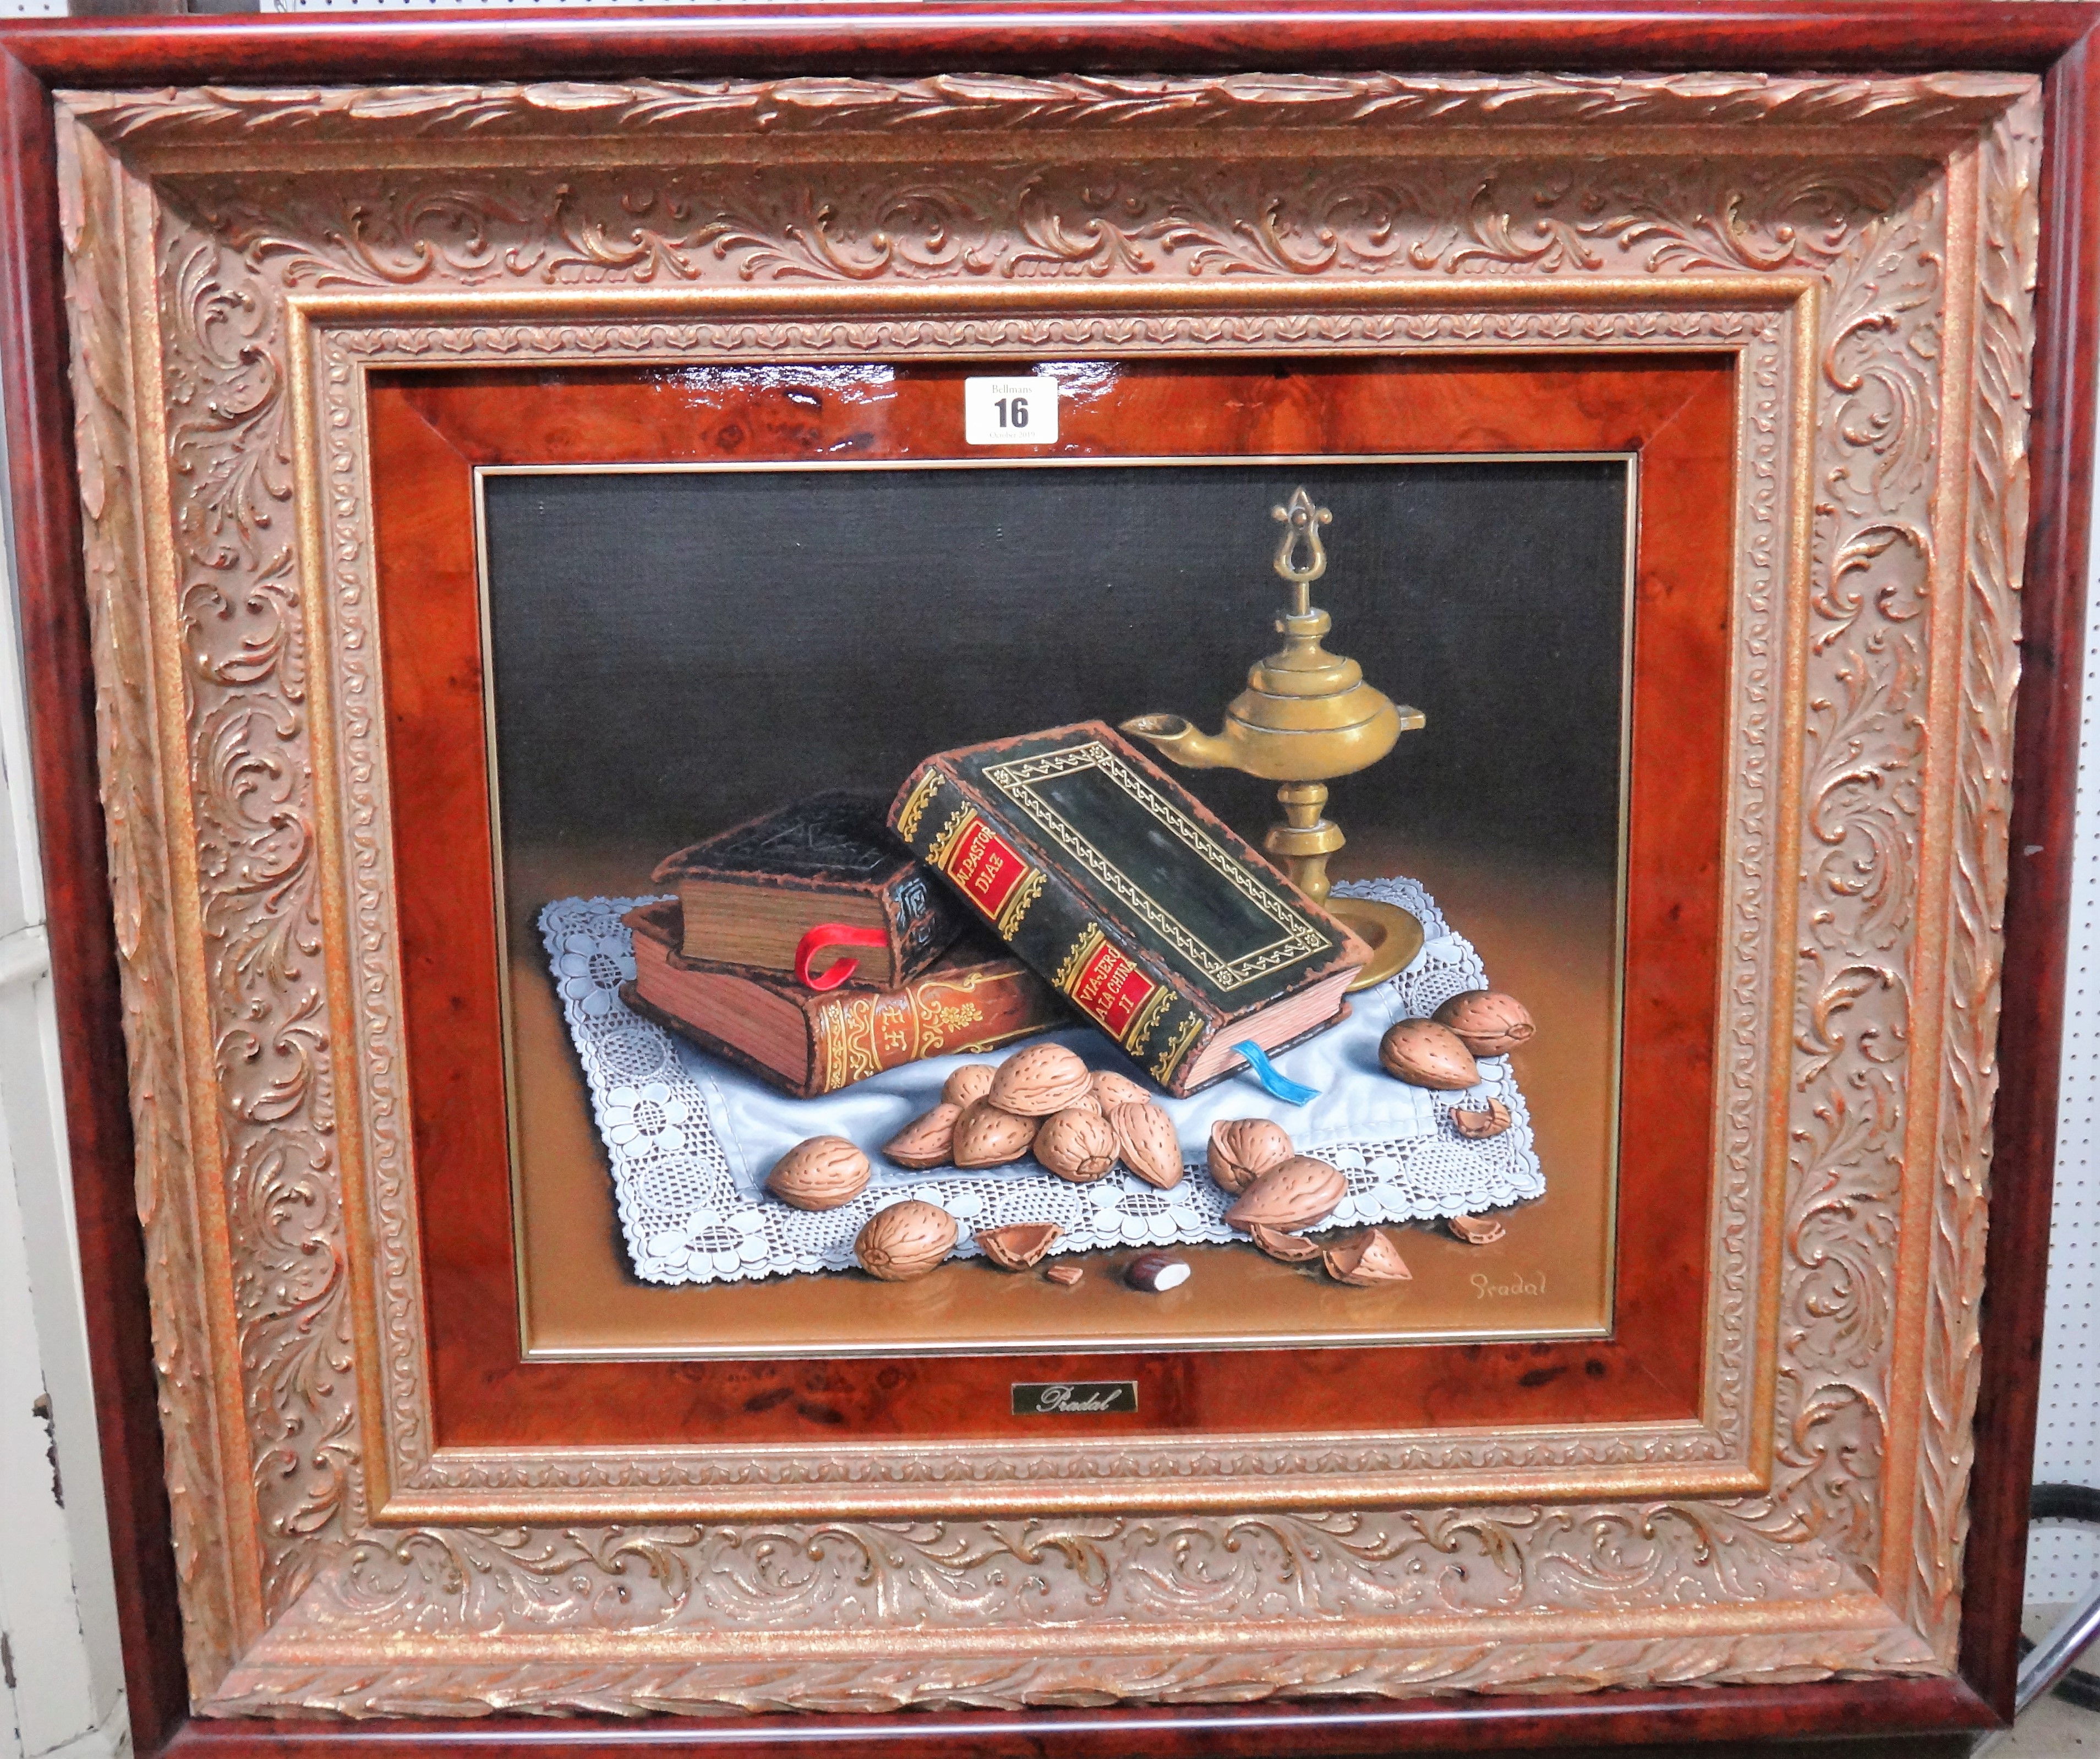 ** Pradal (20th century), Still life of books, oil lamp and walnuts, oil on canvas, signed, 31cm x 39cm.